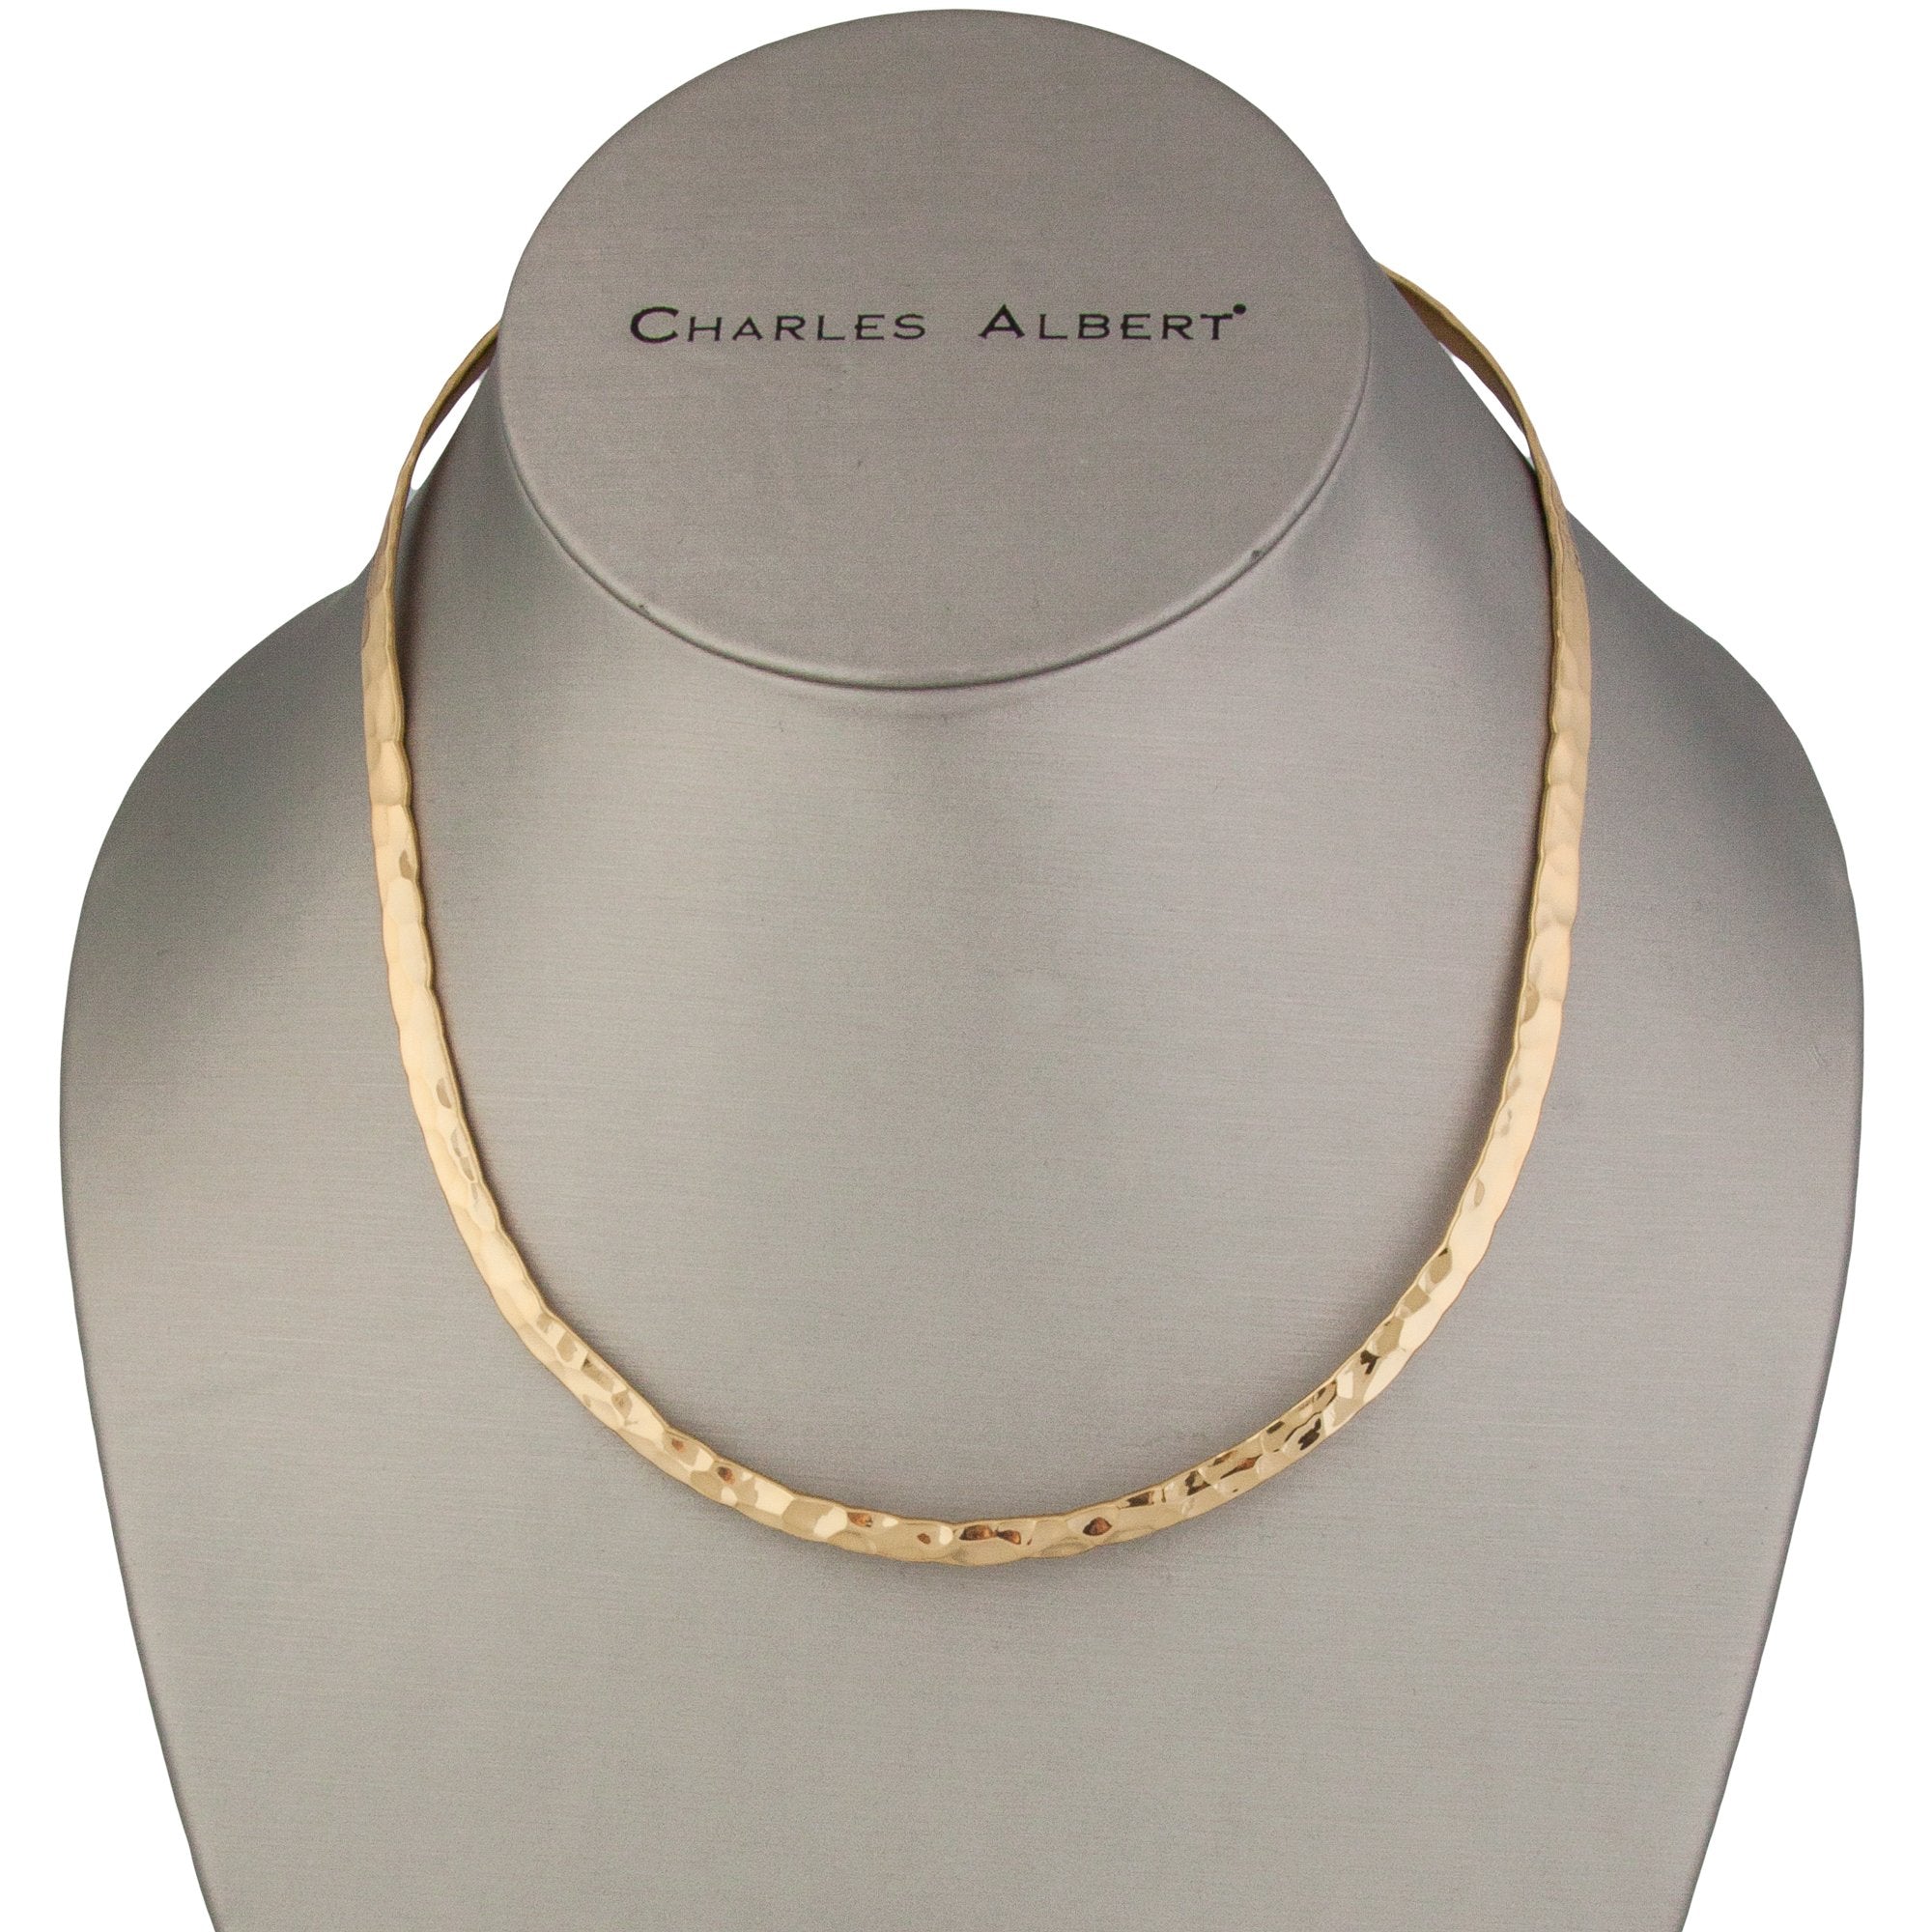 Alchemia Hammered Oval Neckwire | Charles Albert Jewelry